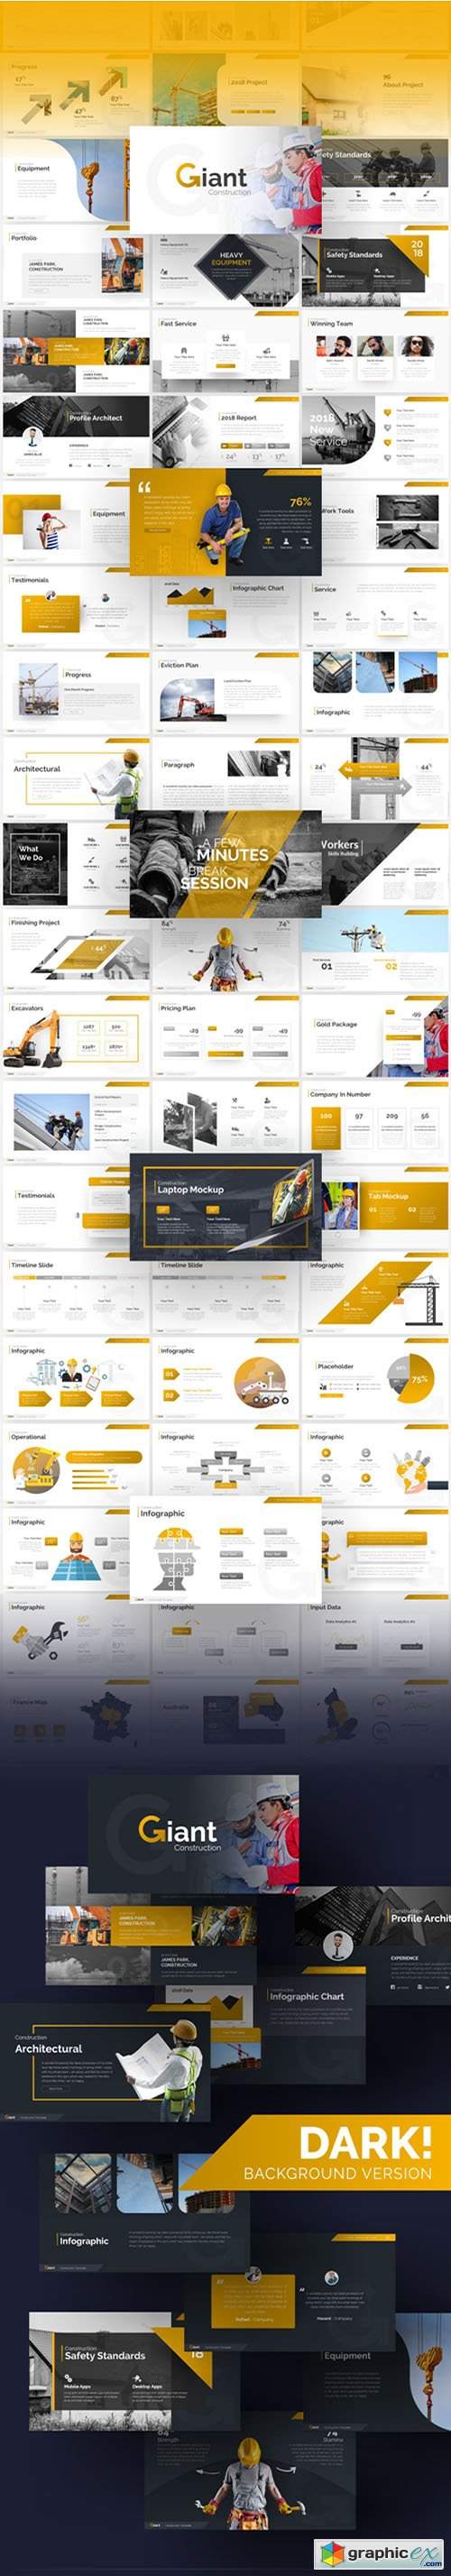 Giant Construction PowerPoint Presentation Template